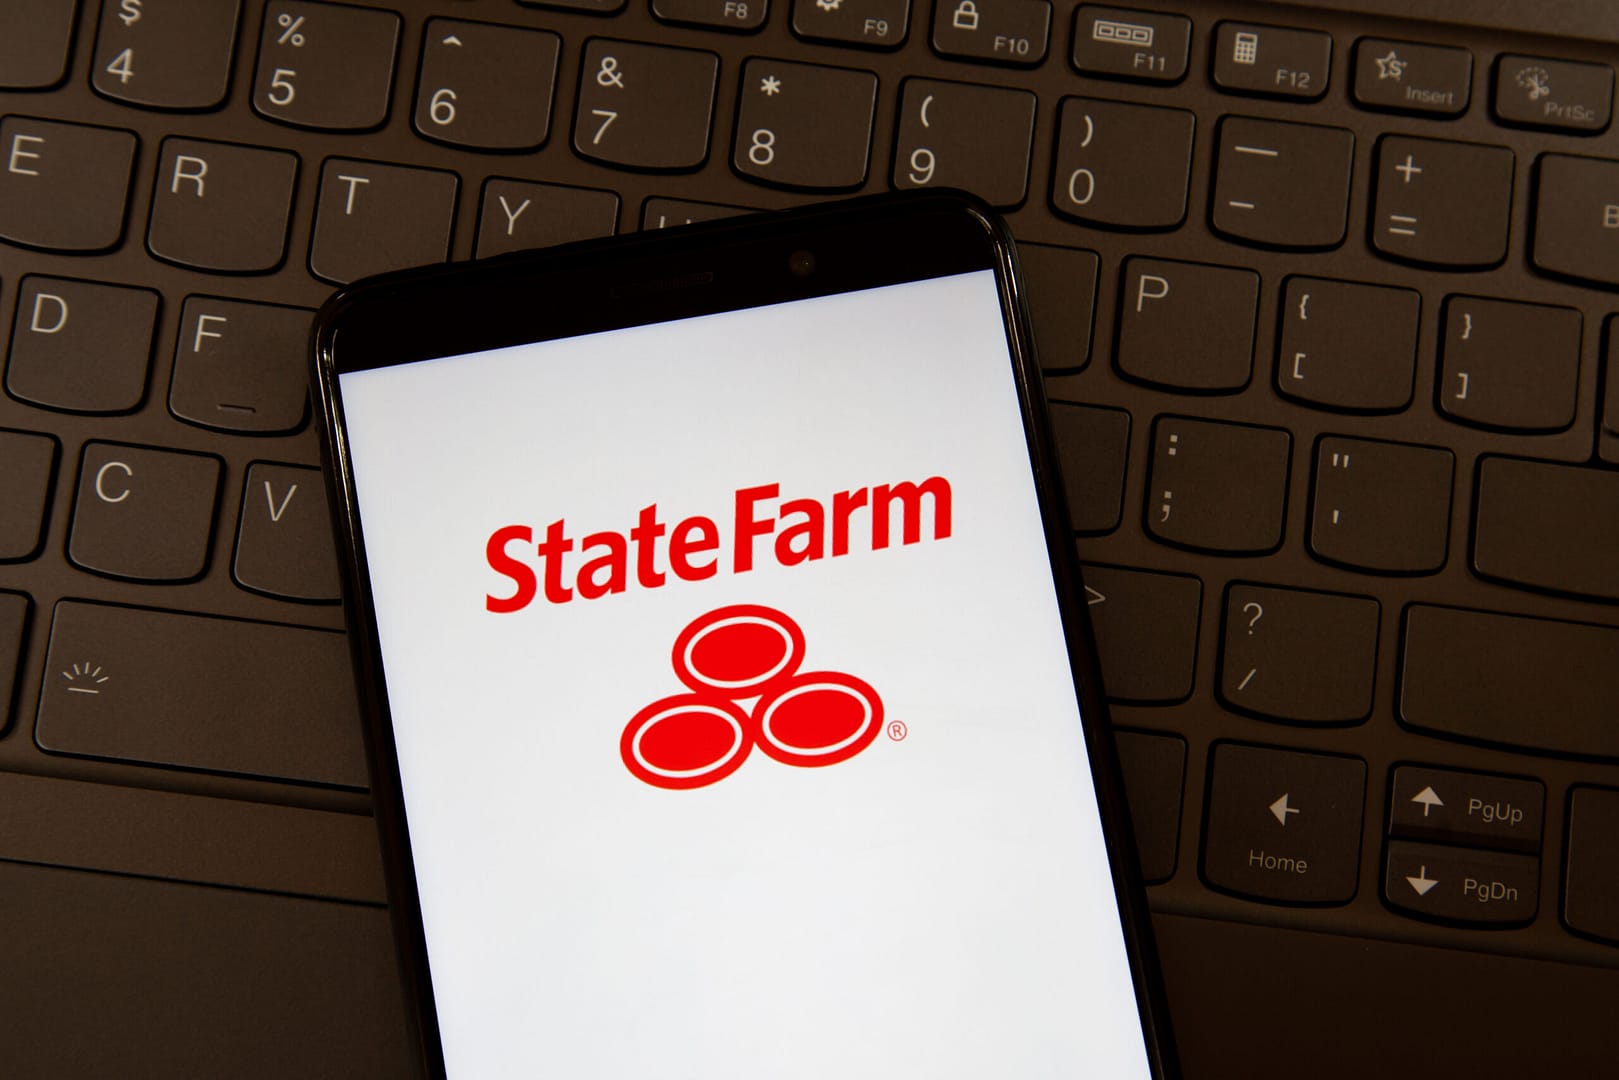 State Farm AdobeStock 475943220 Editorial Use Only scaled